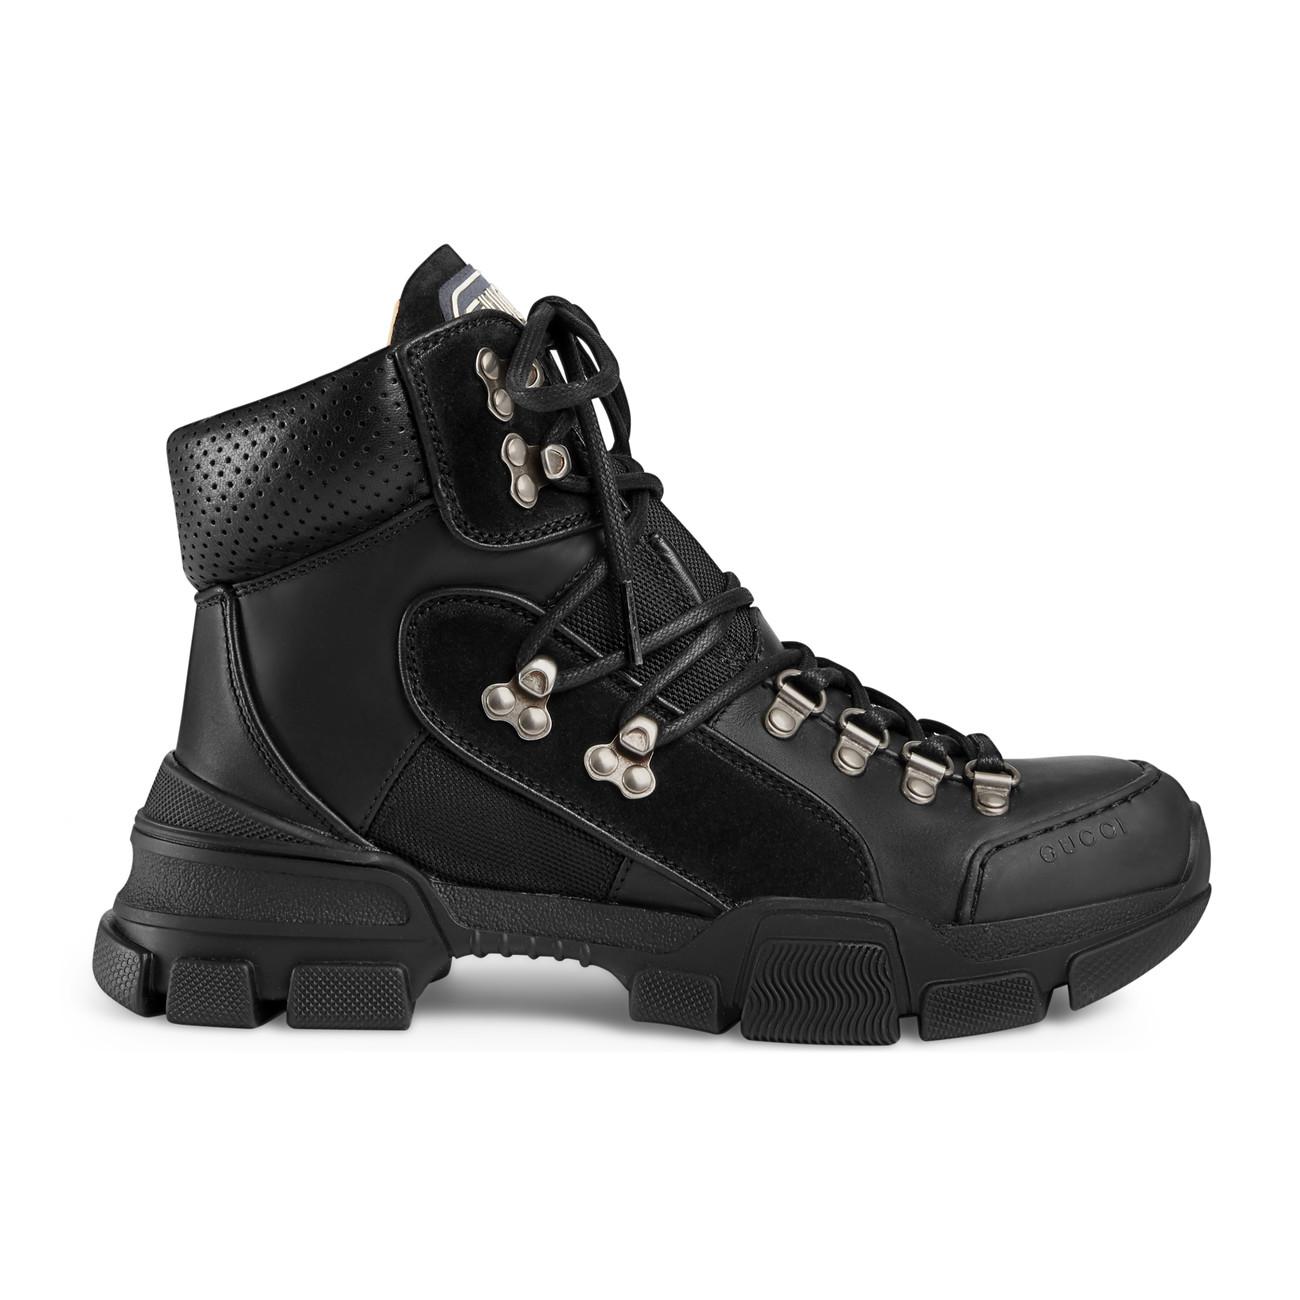 Gucci Flashtrek High-top Sneakers in Black - Save 35% - Lyst